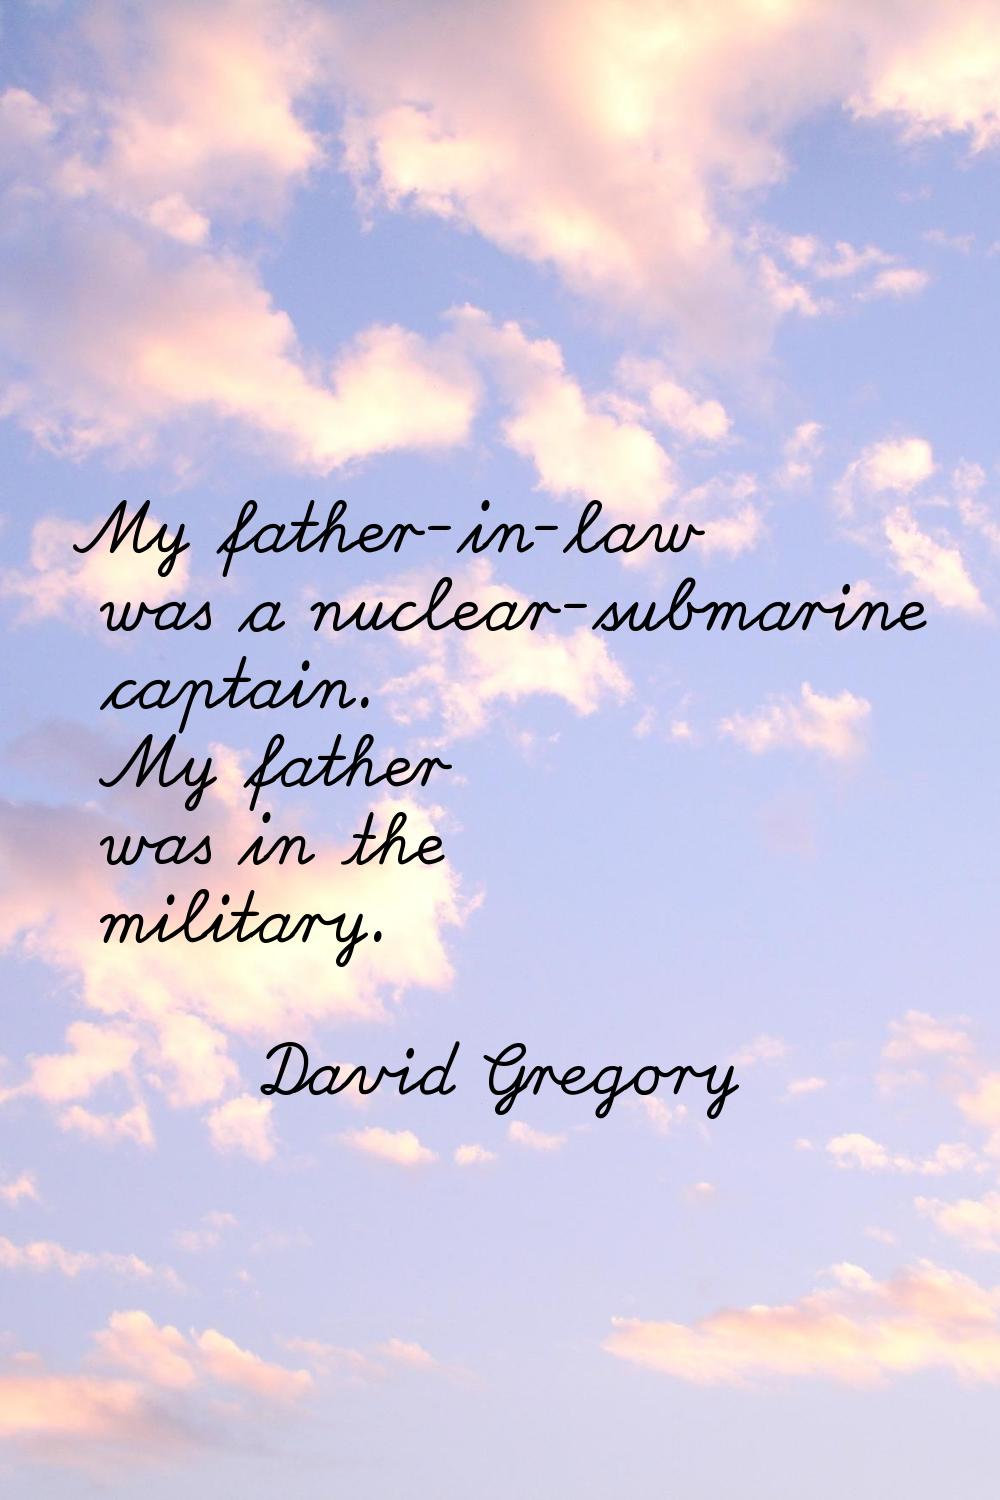 My father-in-law was a nuclear-submarine captain. My father was in the military.